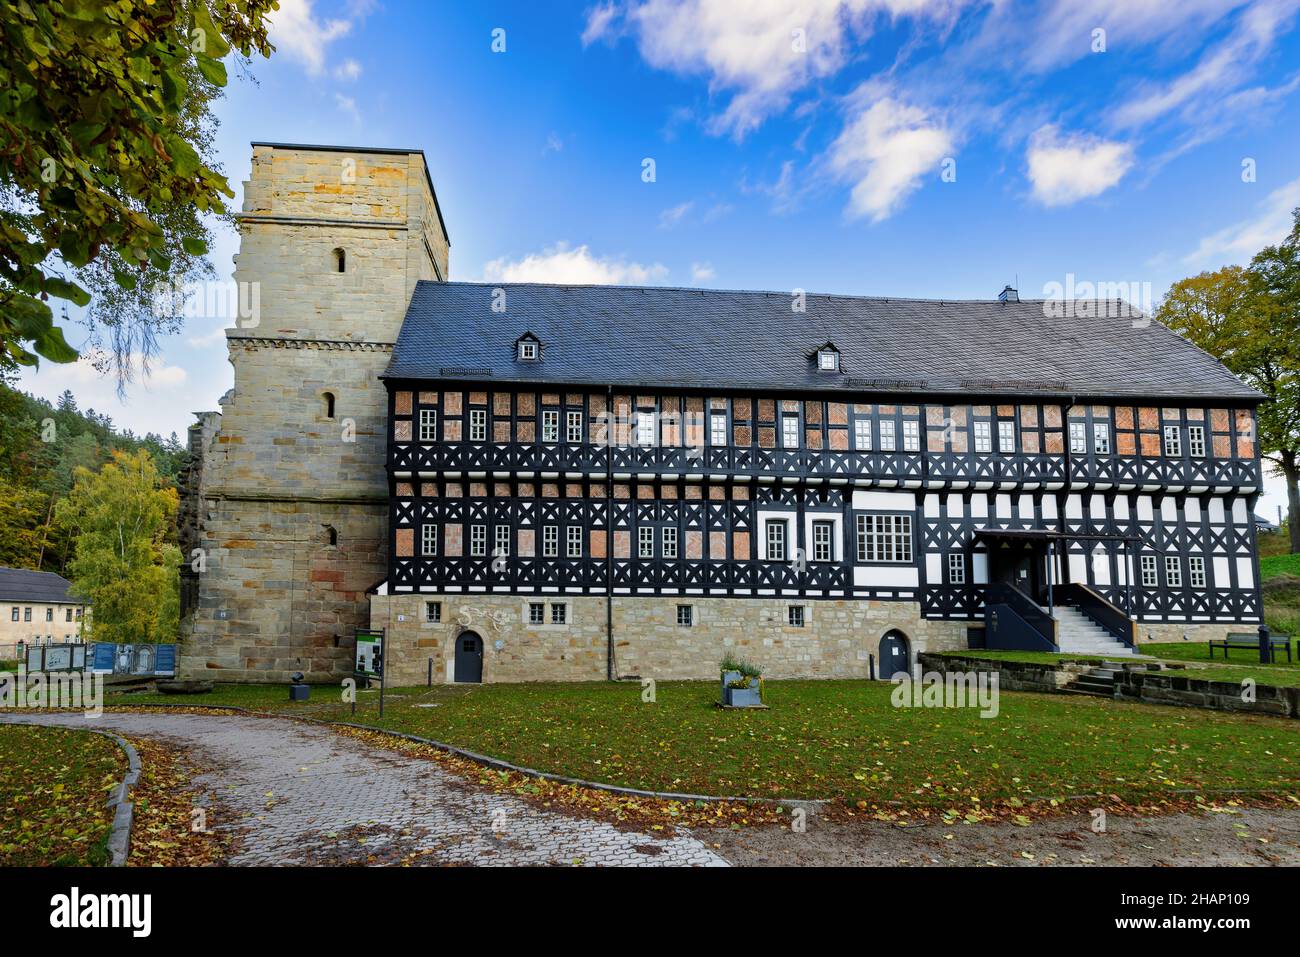 Foresters house at the Monastery Paulinzella in Rottenbach, Thuringia, Germany. Stock Photo